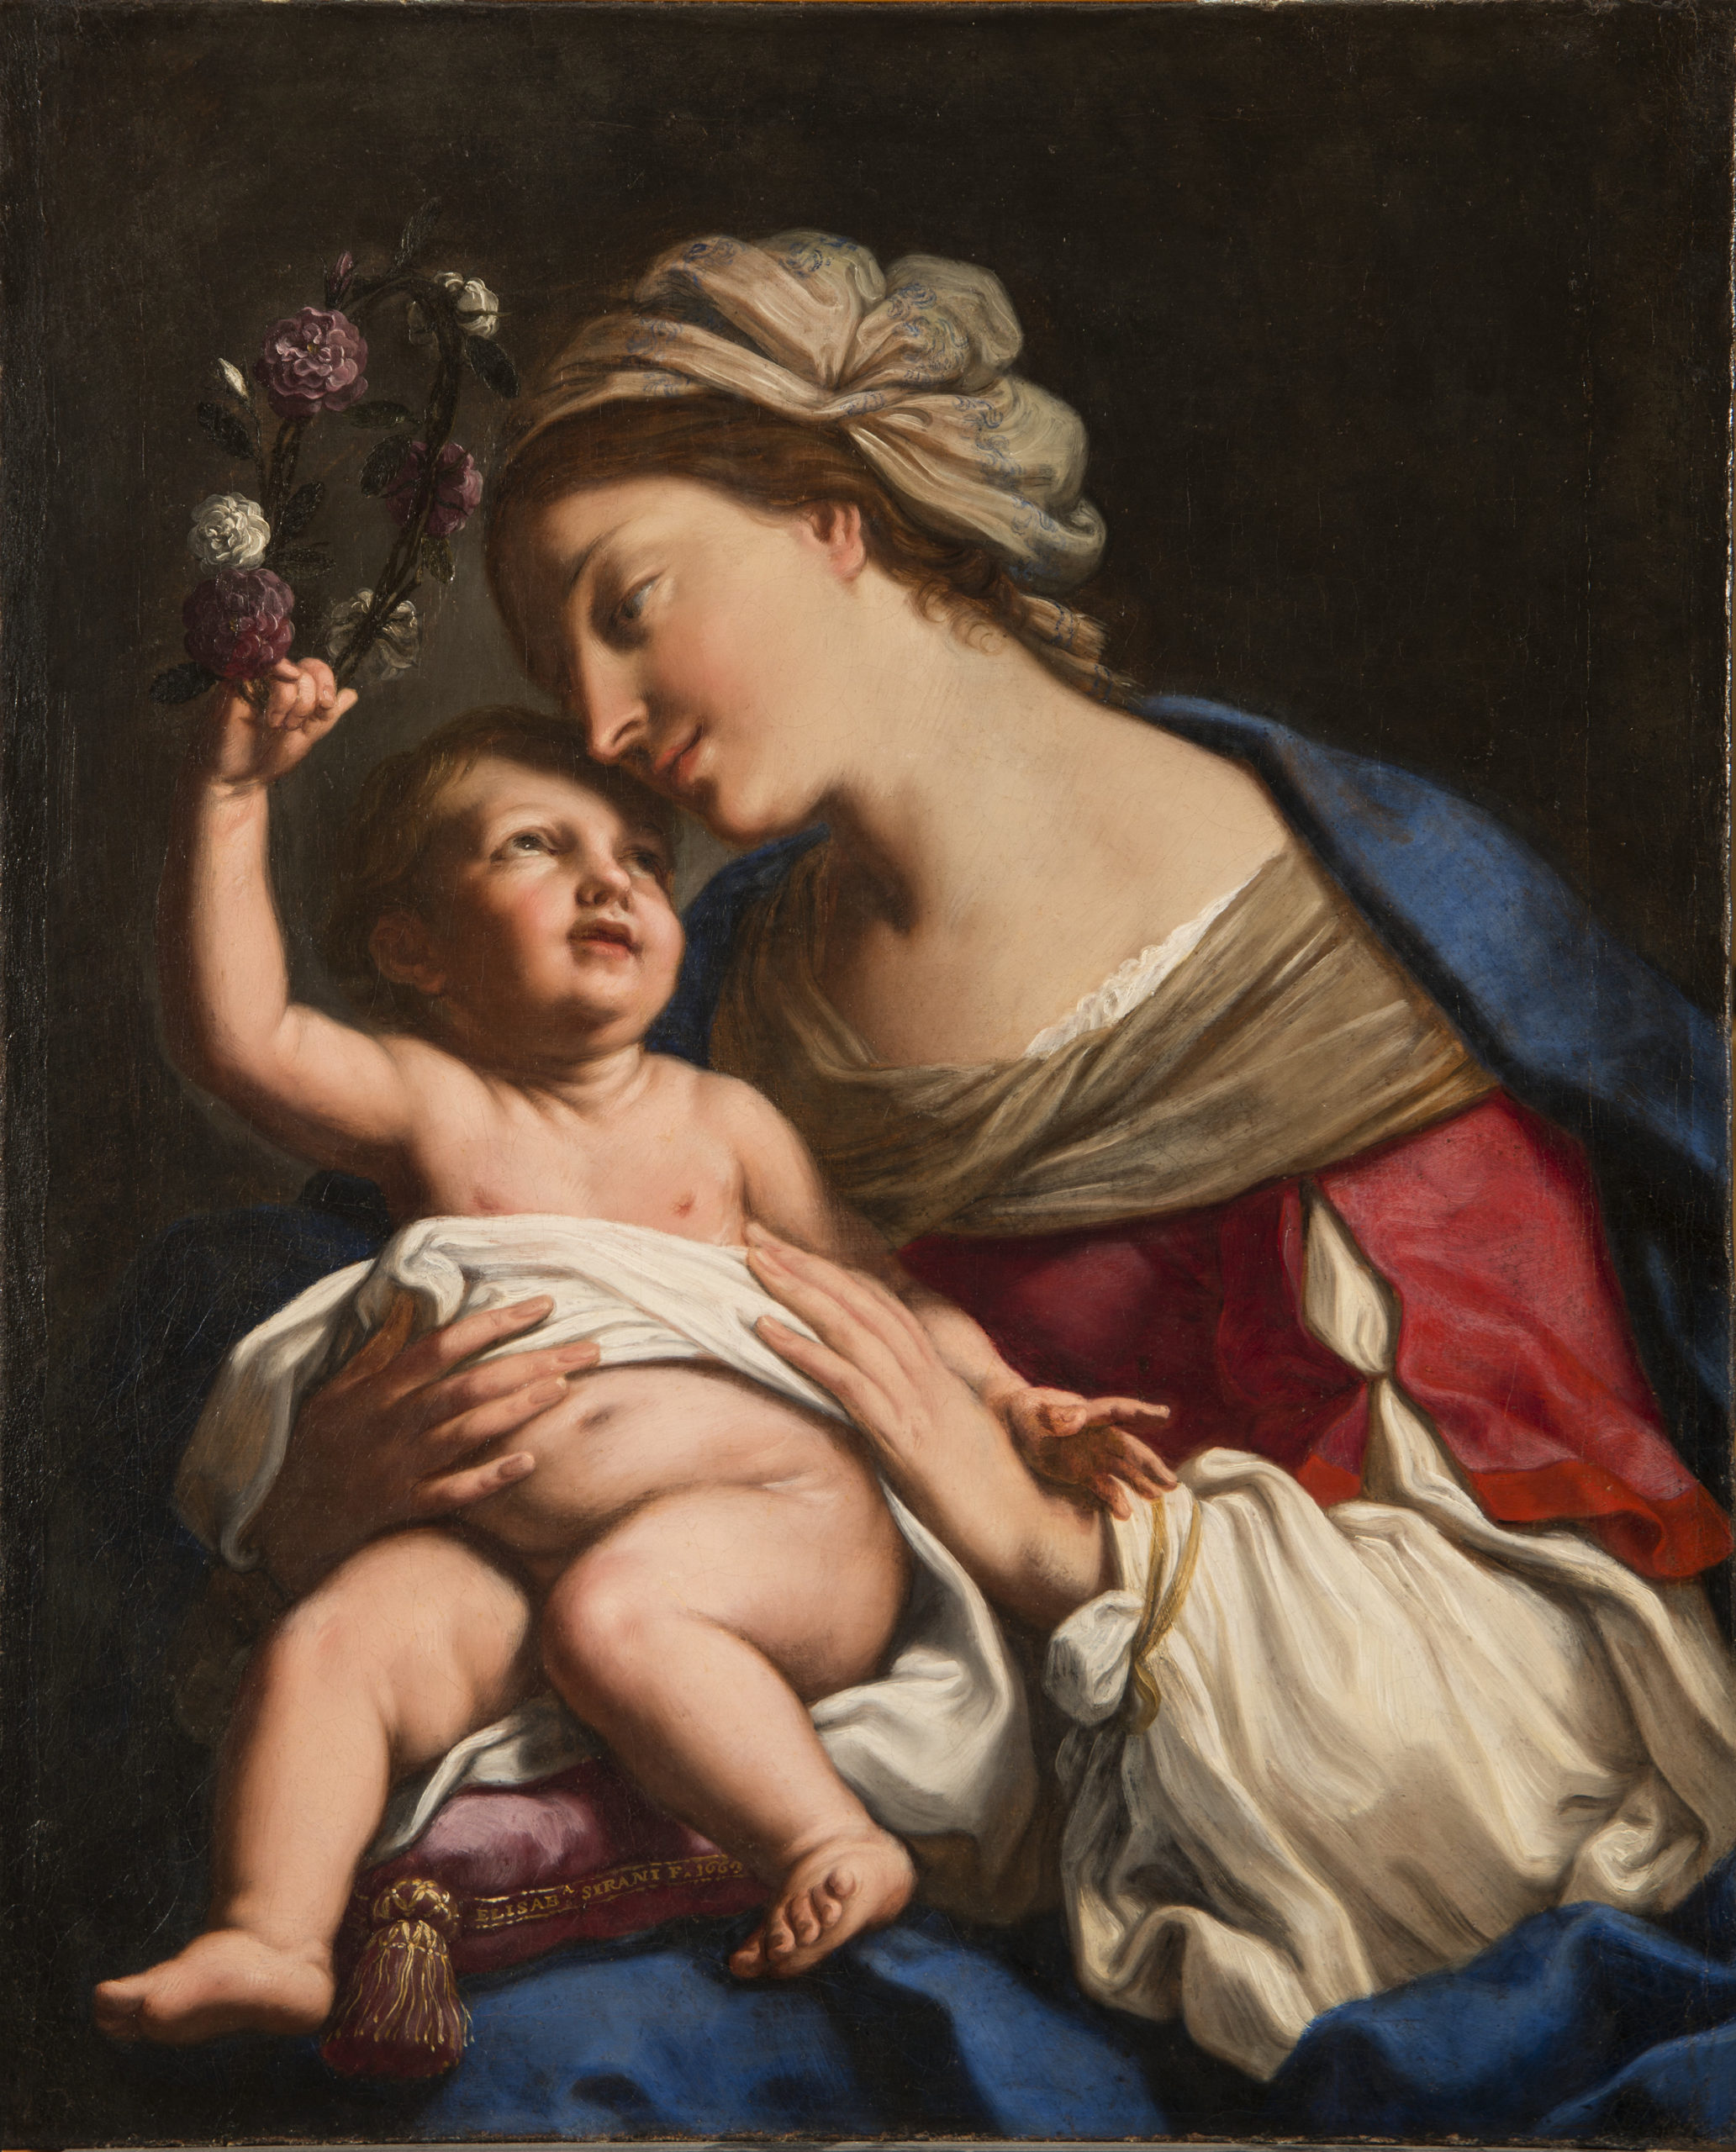 A young, light-skinned, brunette woman gazes down lovingly at the plump baby she holds on her lap. She wears a loose, tan turban, vivid blue cloak, and red dress with white sleeves. The light-skinned child returns her gaze, leaning back to crown the woman with a circlet of roses.